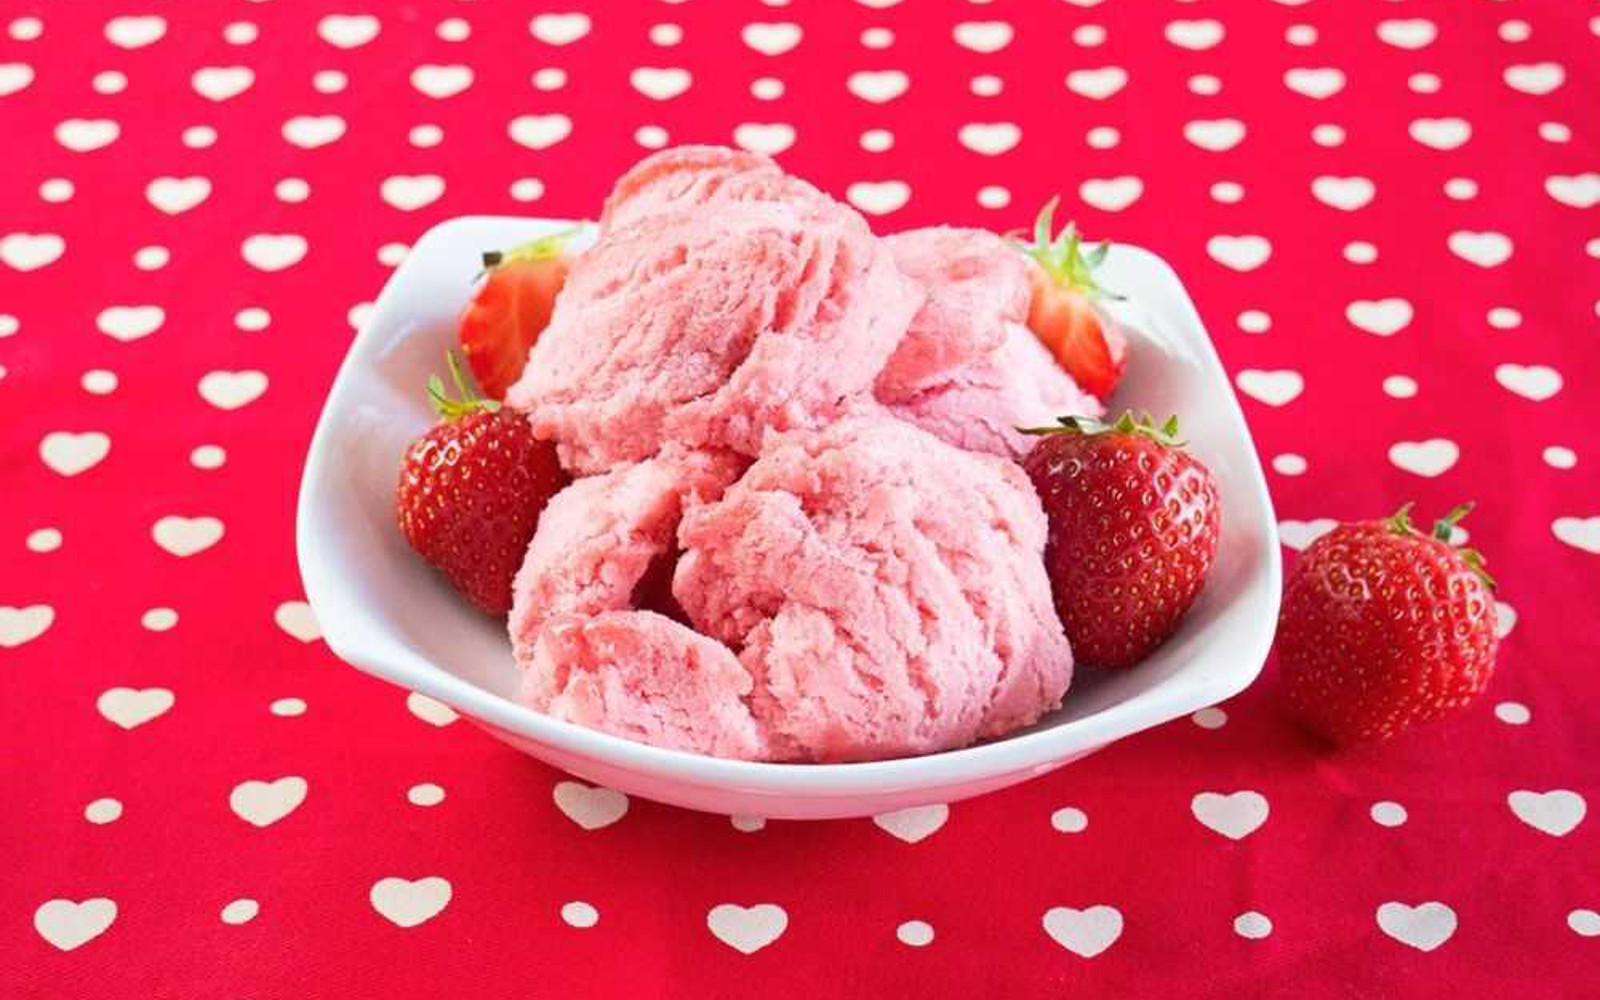 3-Ingredient Cotton Candy Strawberry Ice Cream (Made With Aquafaba!)